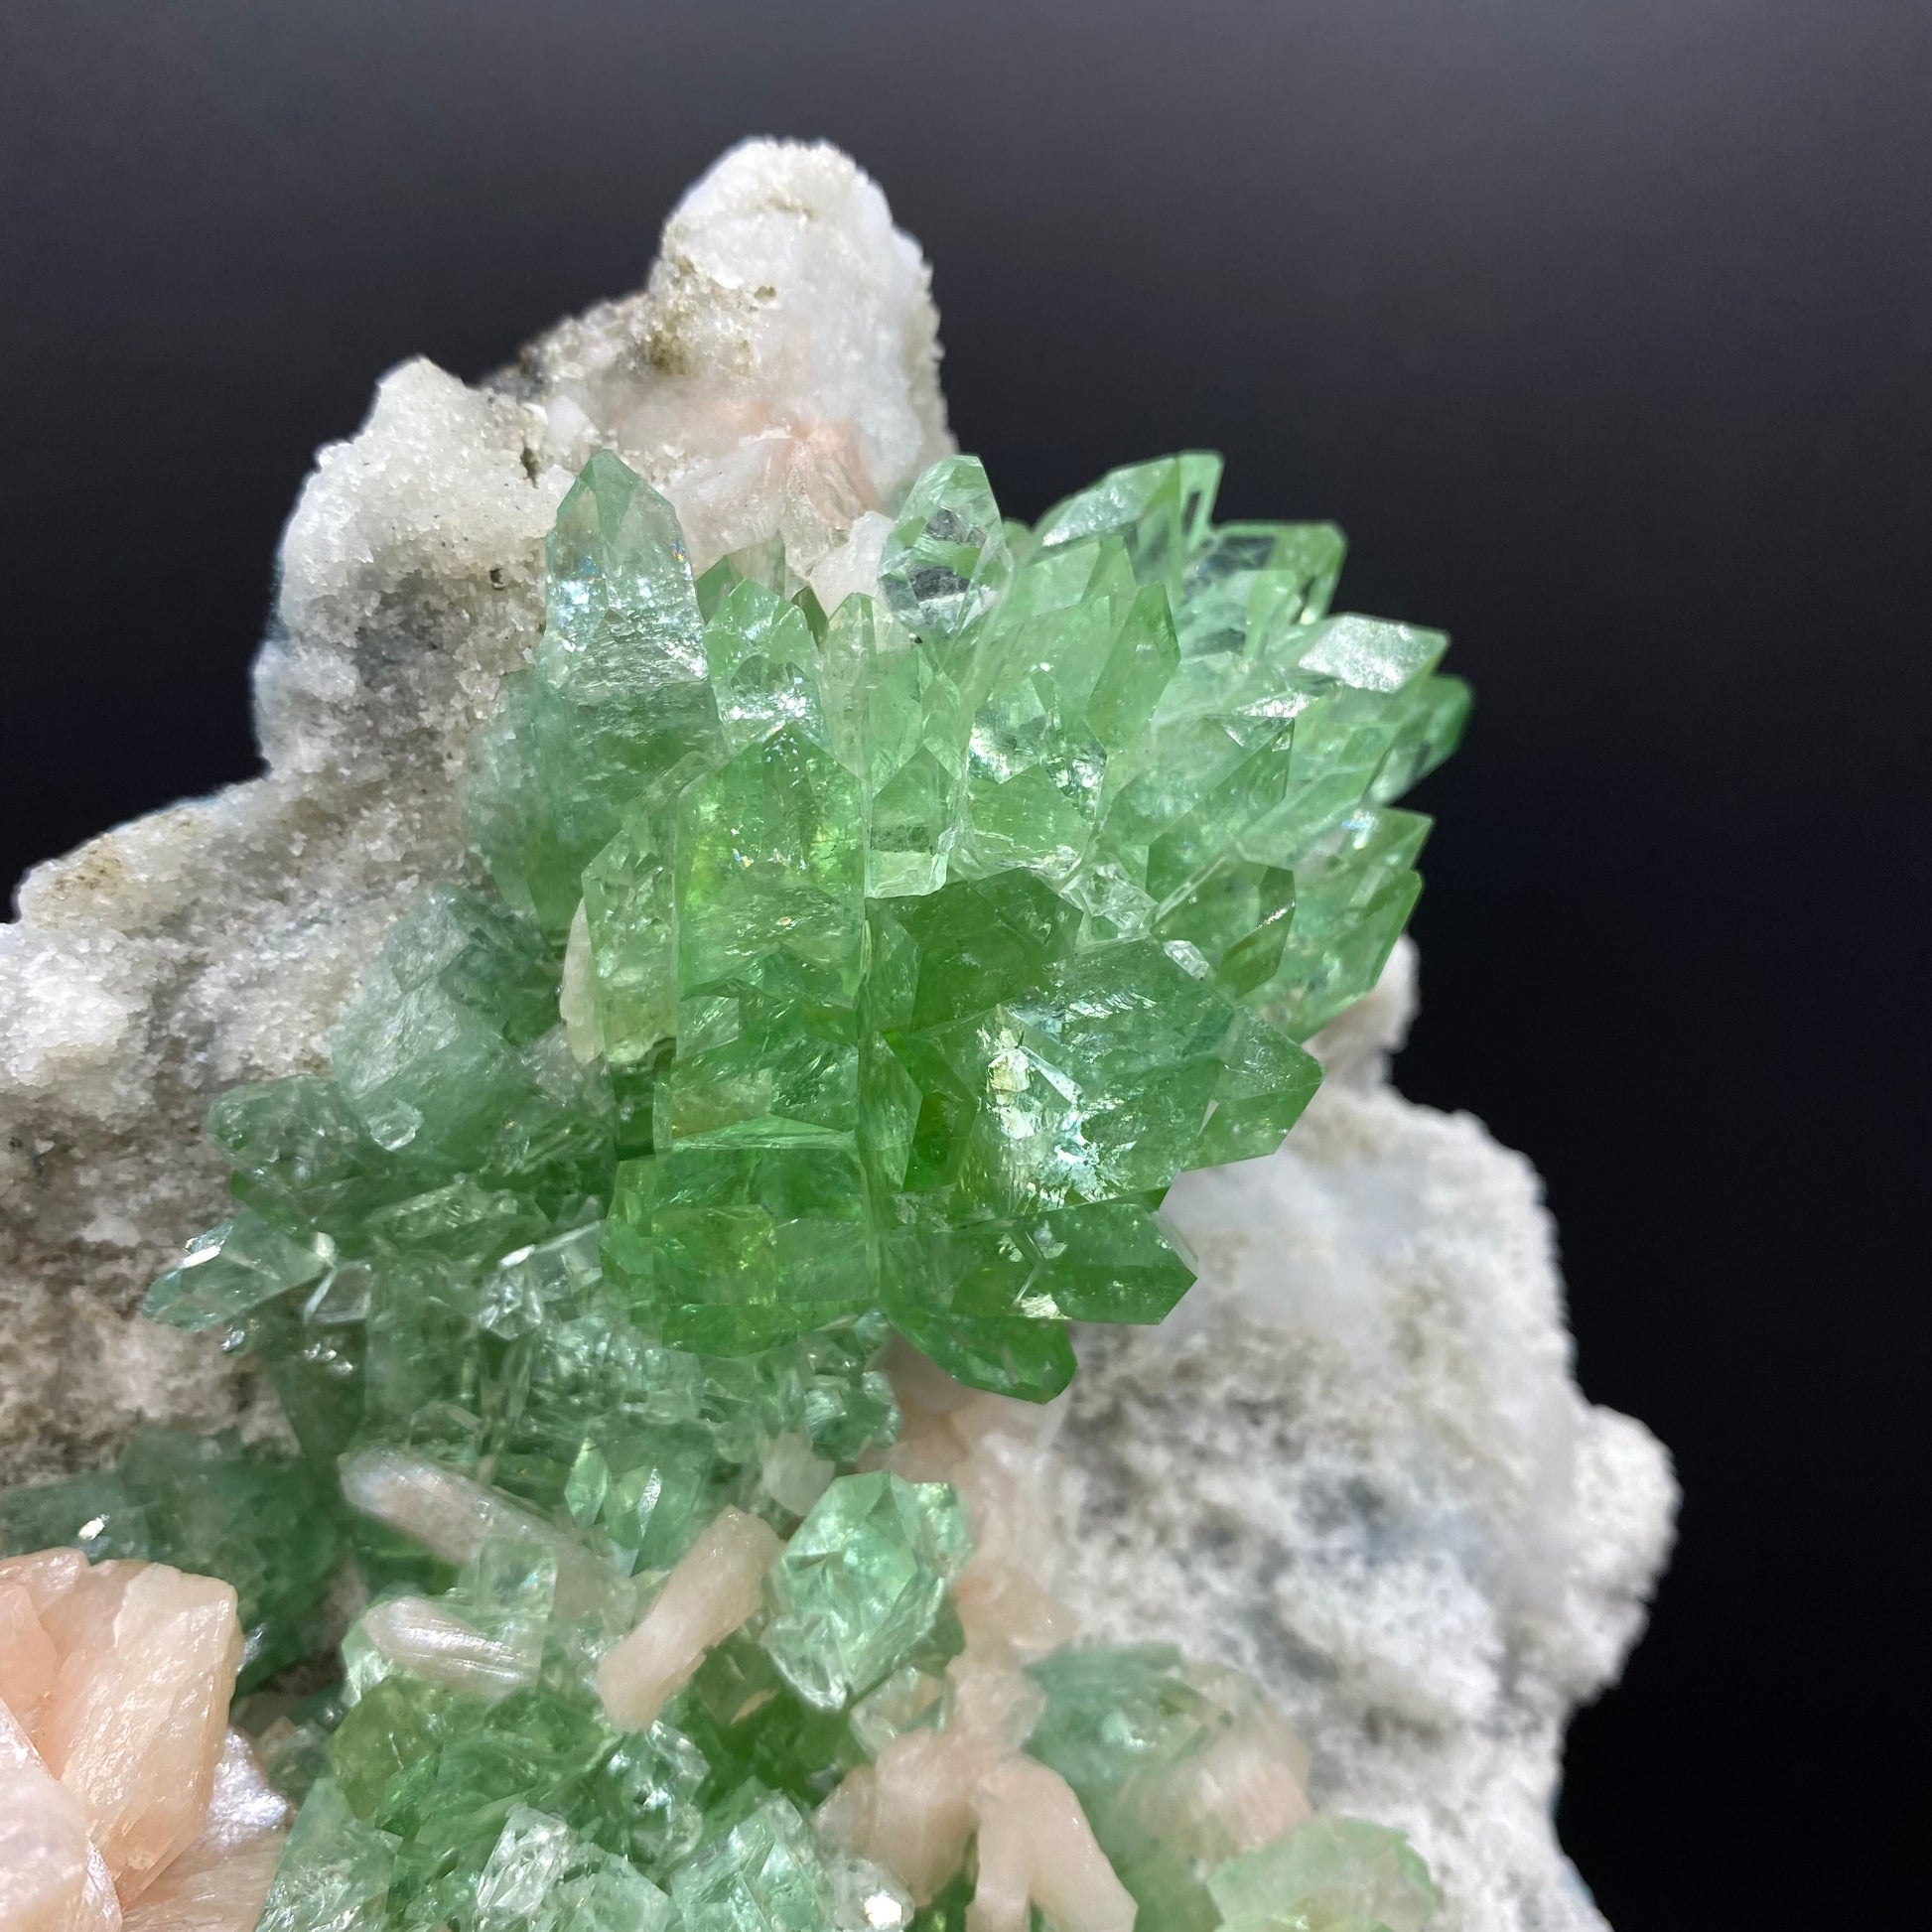 Green Apophyllite with Stilbite on Chalcedony Matrix from Jalgaon, Maharashtra, India. Natural mineral specimen. Museum grade mineral for crystal collectors.